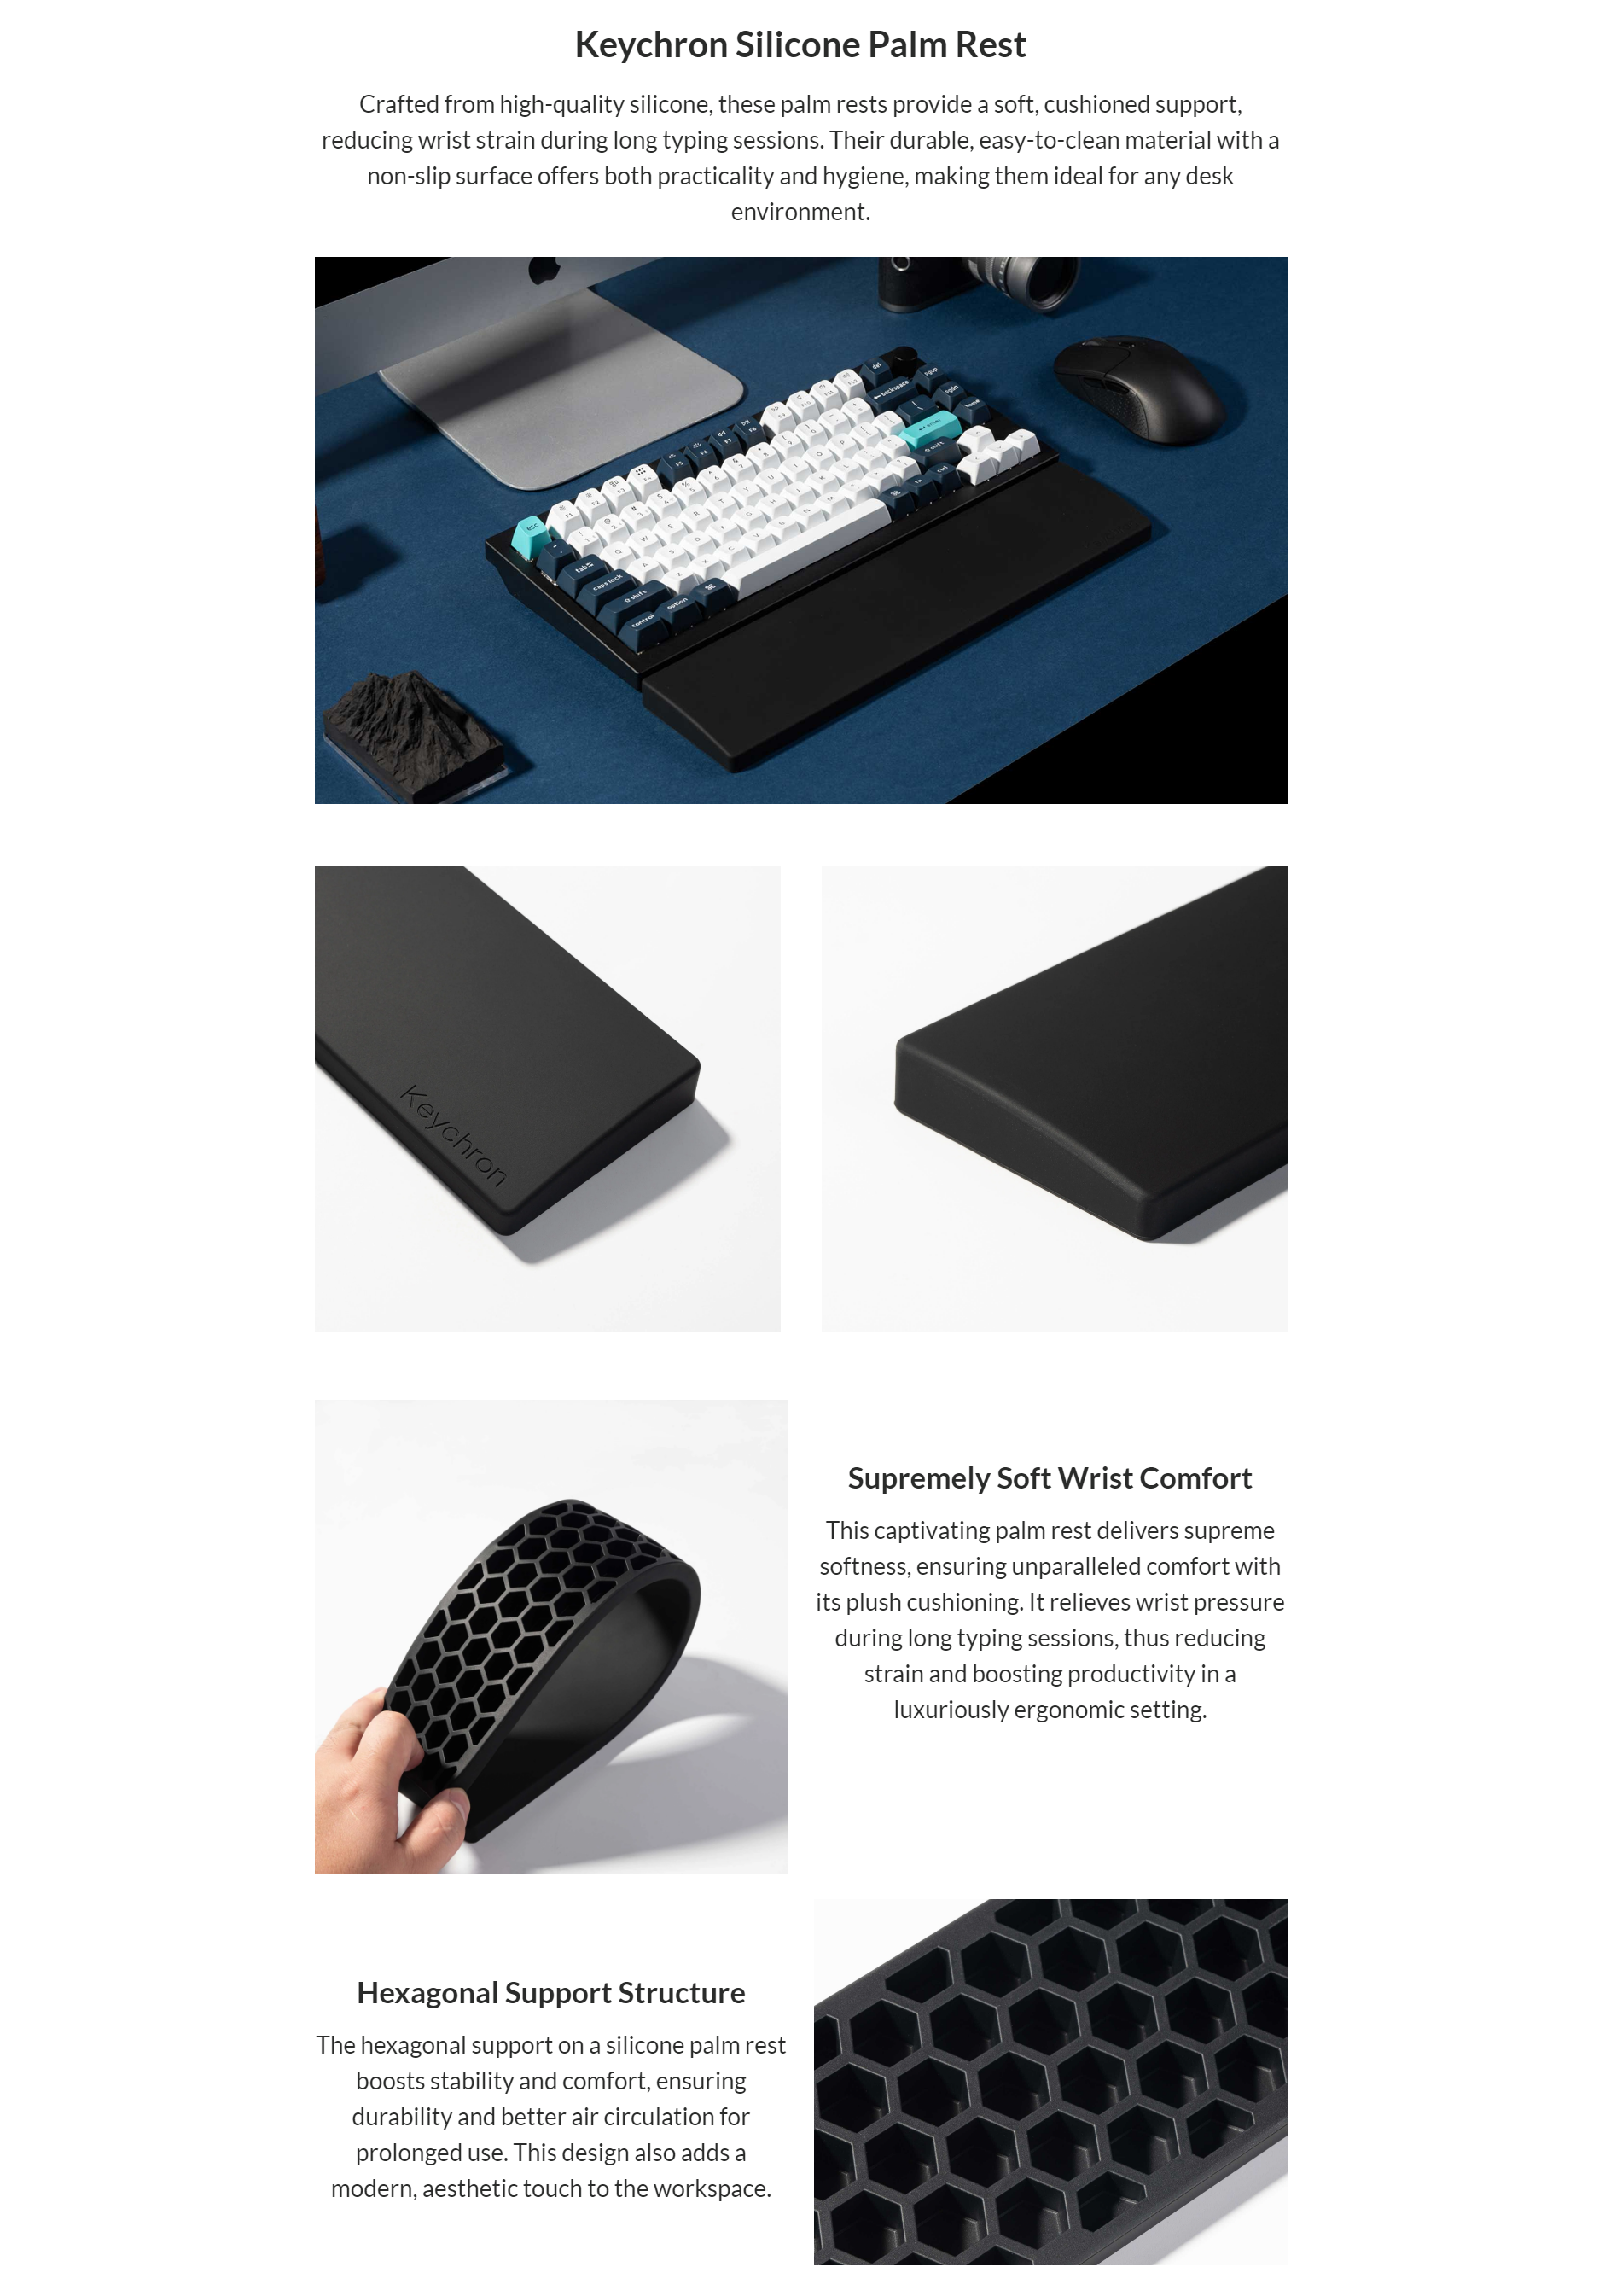 A large marketing image providing additional information about the product Keychron PR47 Silicone Palm Rest - Additional alt info not provided